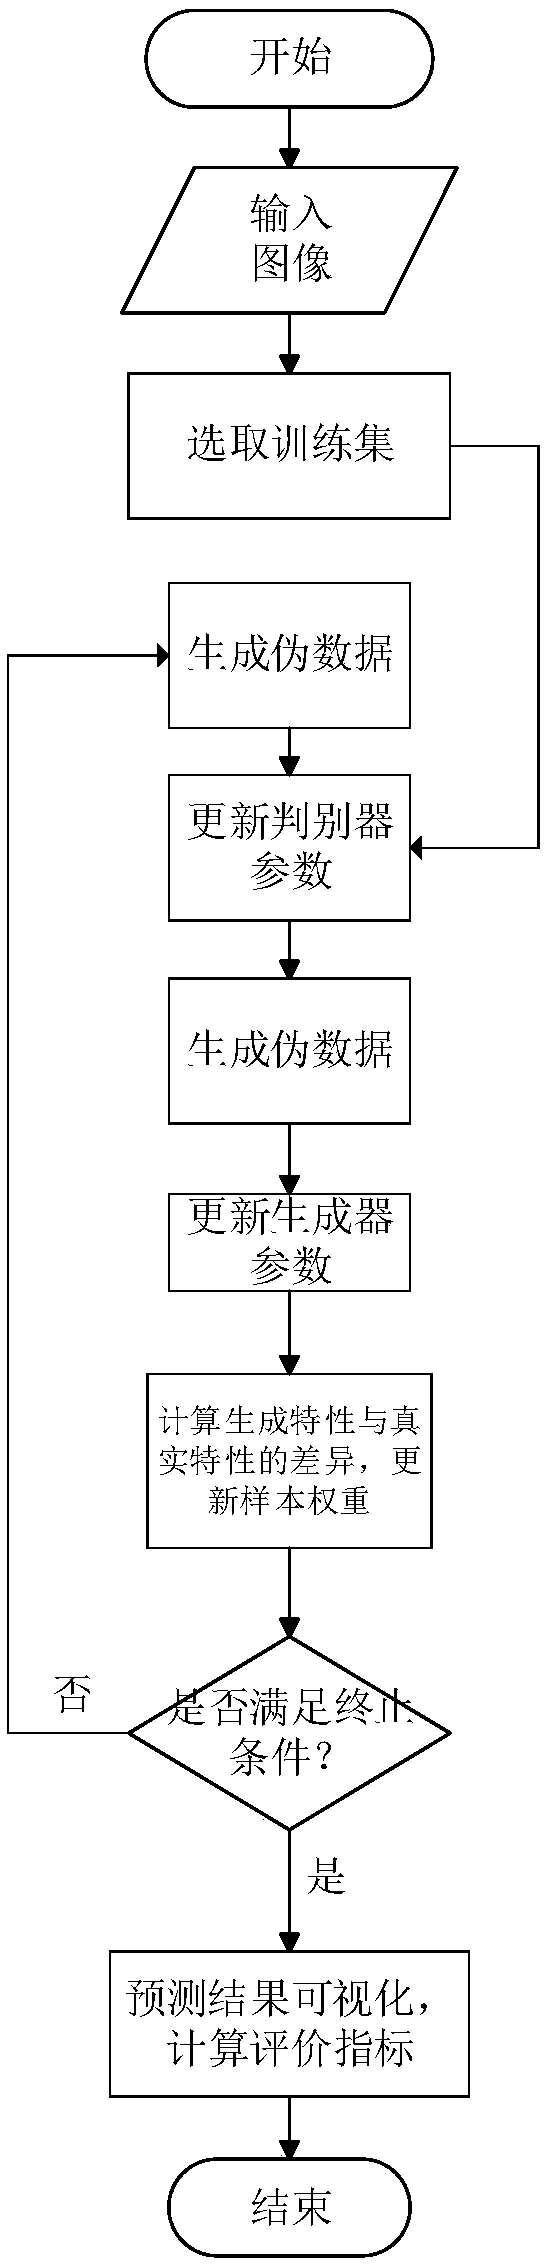 SAR image object classification method based on countermeasure network generated by distribution and structure matching